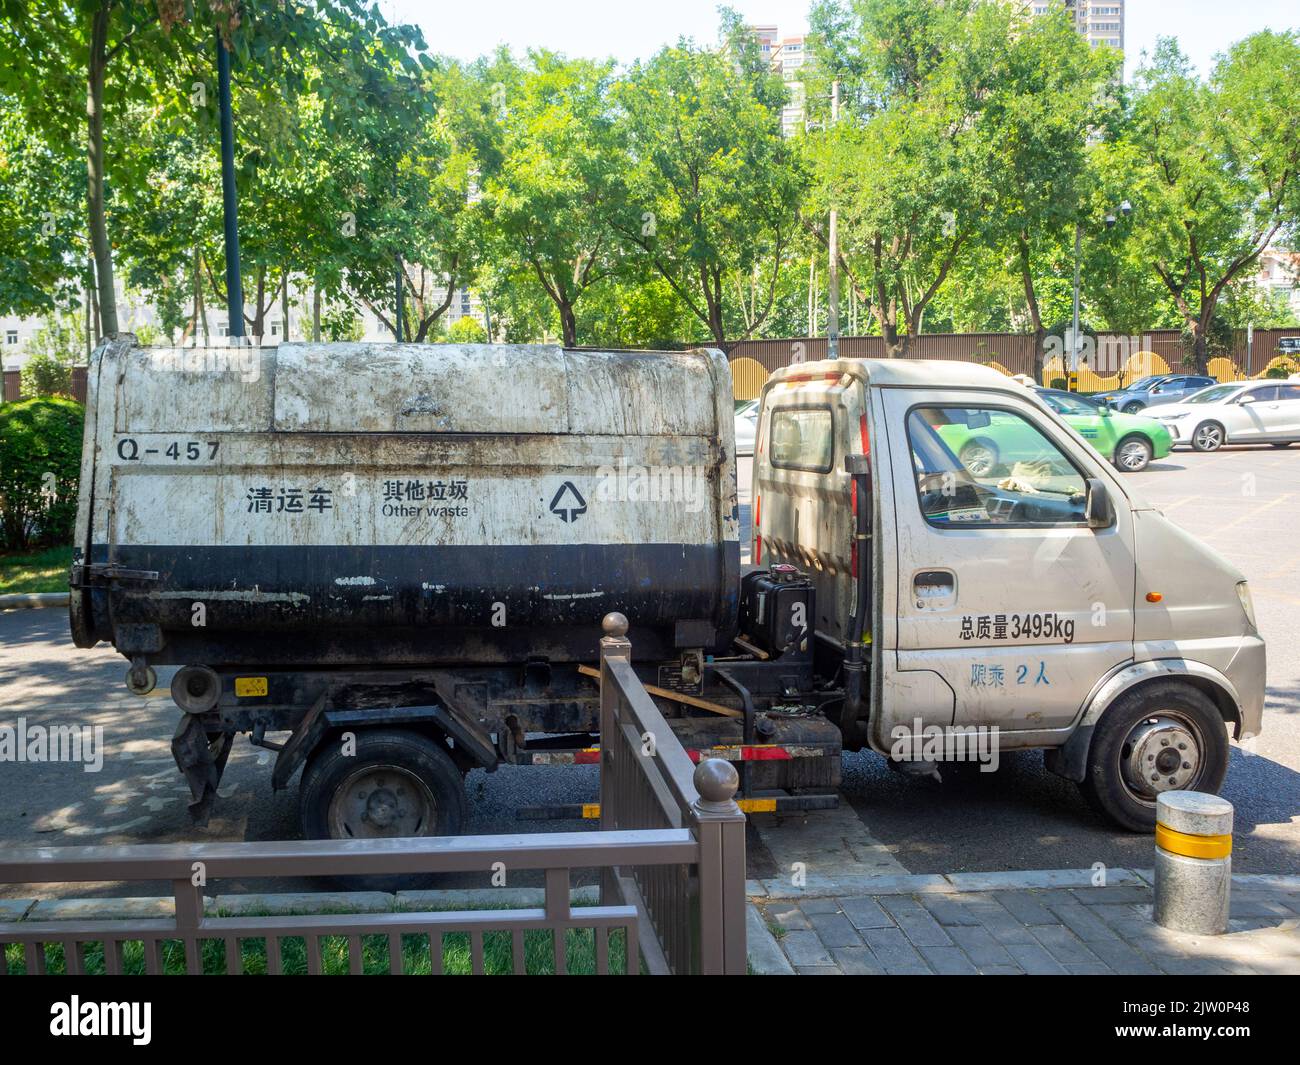 Side view of a garbage truck parked in a city street. Stock Photo